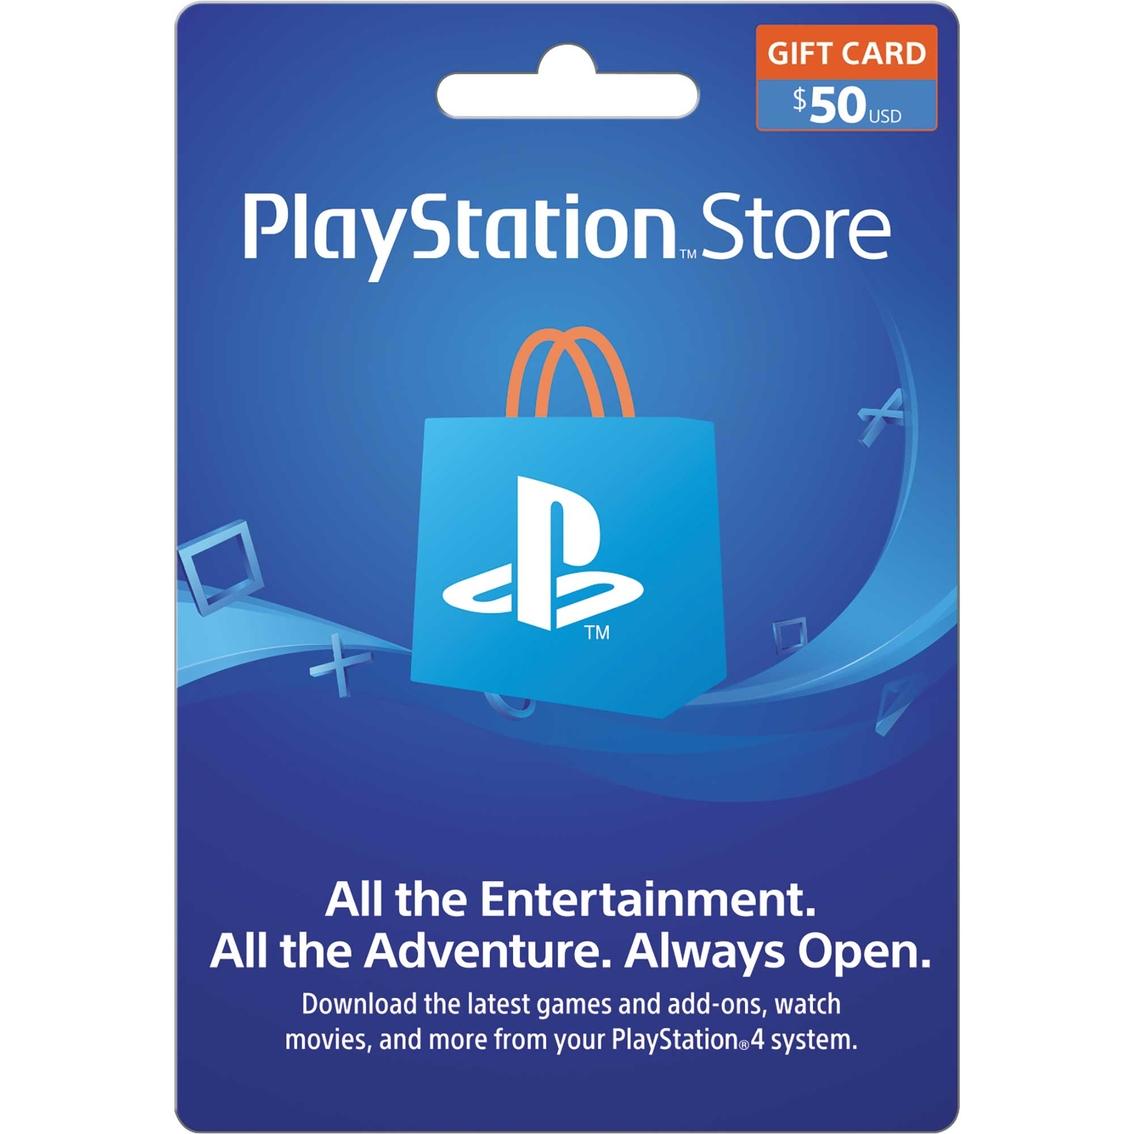 $50 PlayStation Network Gift Card for $43.49